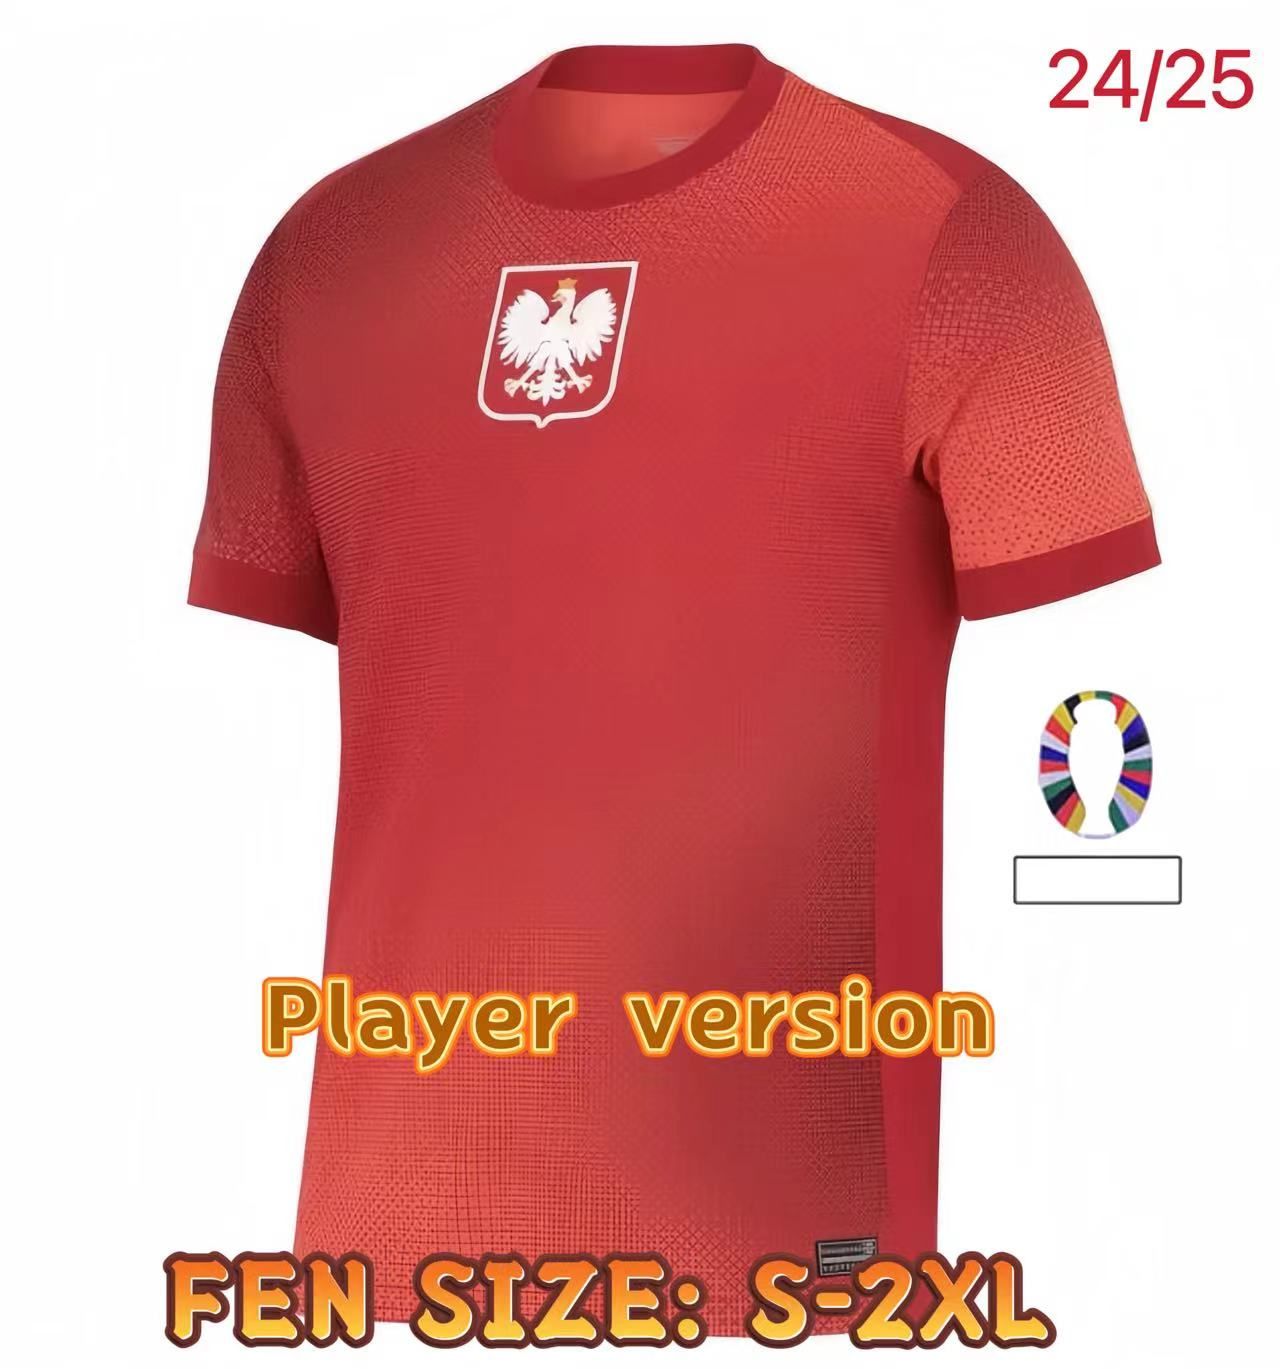 Away+player+patch 24